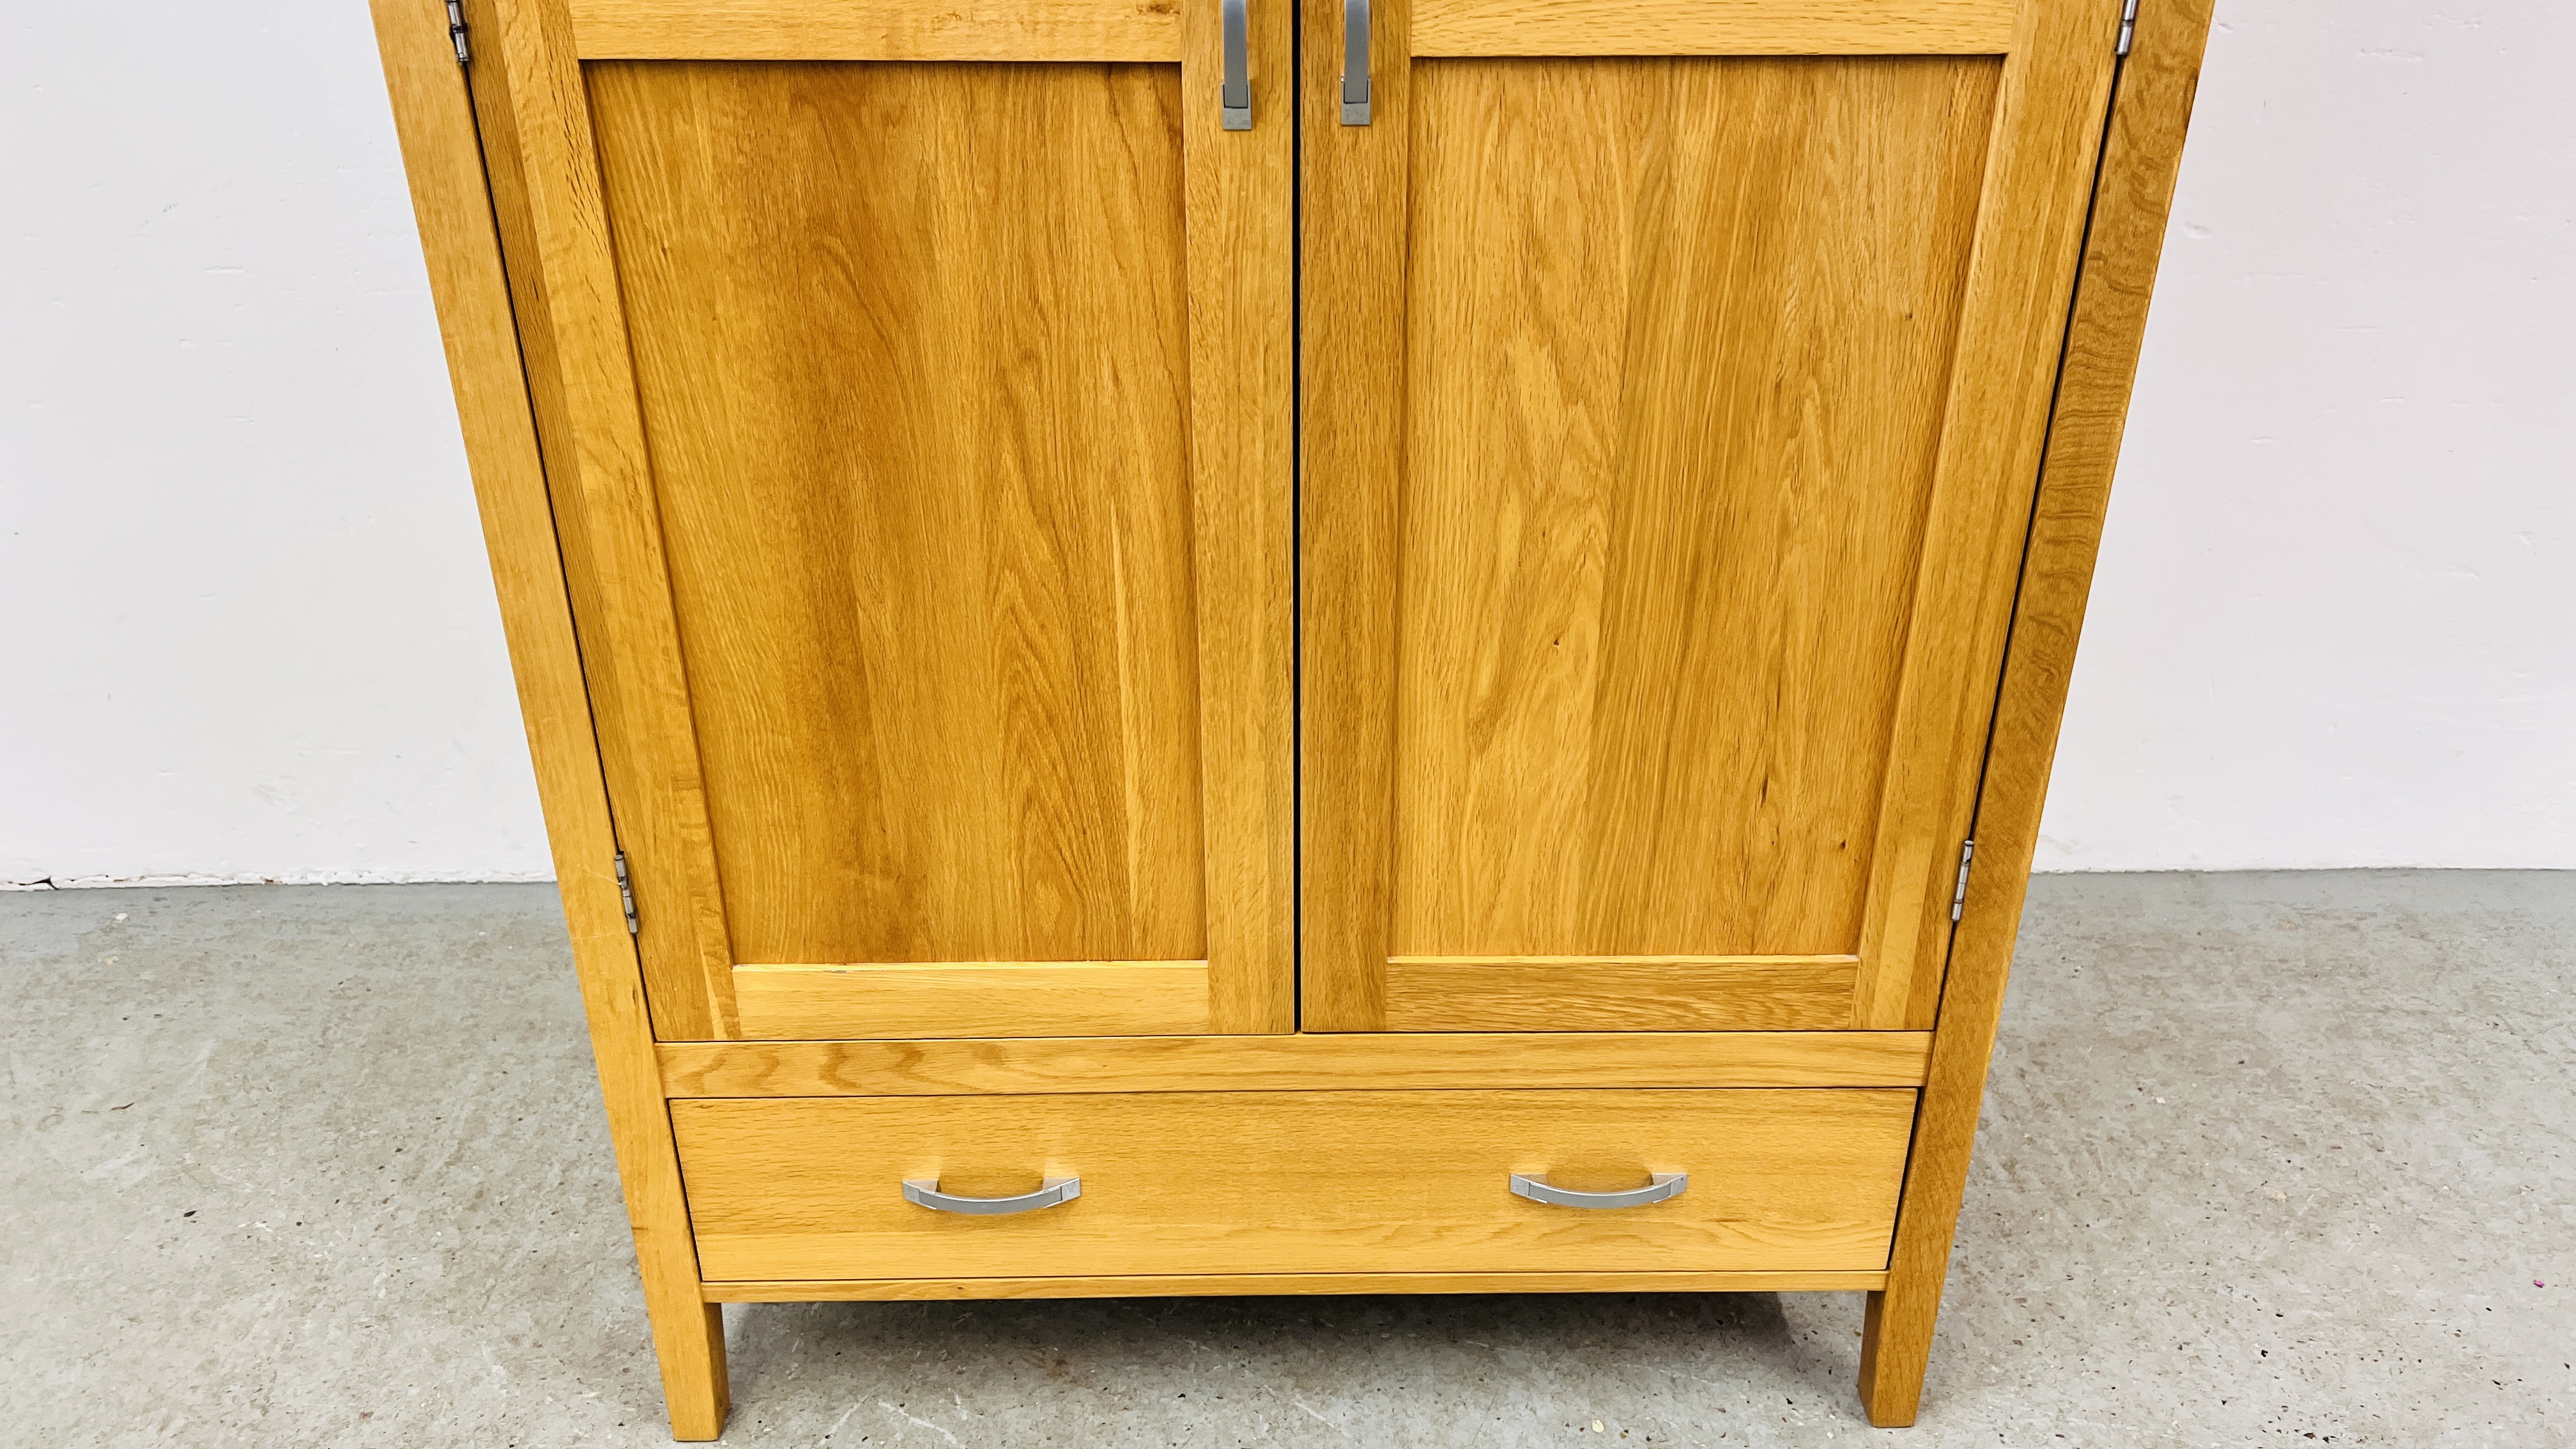 A SOLID LIGHT OAK DOUBLE WARDROBE WITH DRAWER TO BASE, W - 110CM, D - 60CM, H - 191CM. - Image 5 of 8